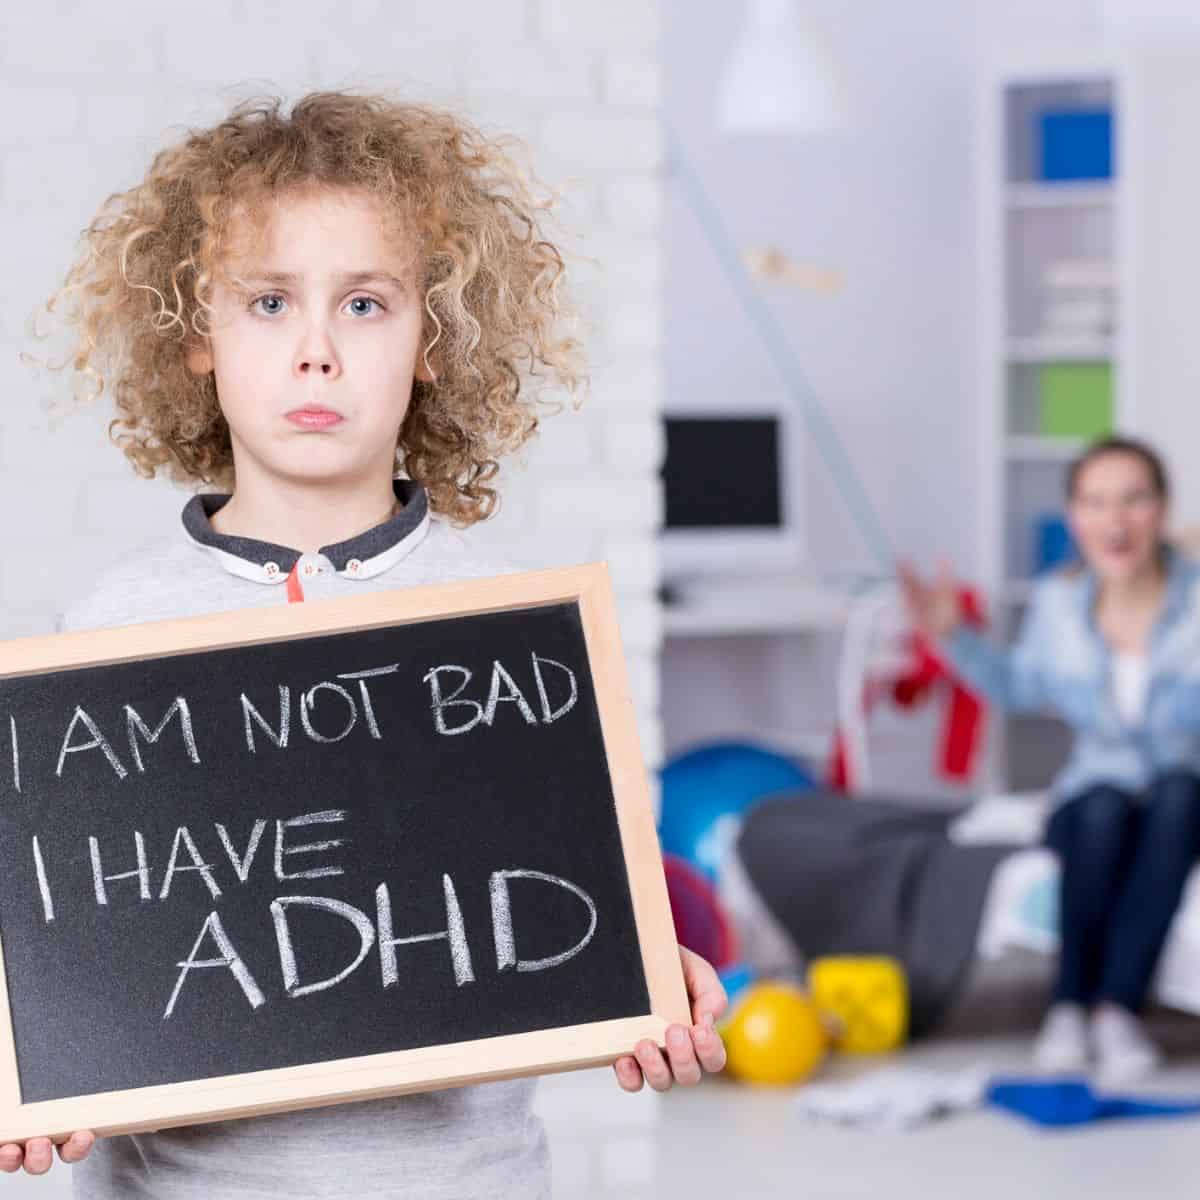 young boy holds sign that reads "I am not bad, I have ADHD"